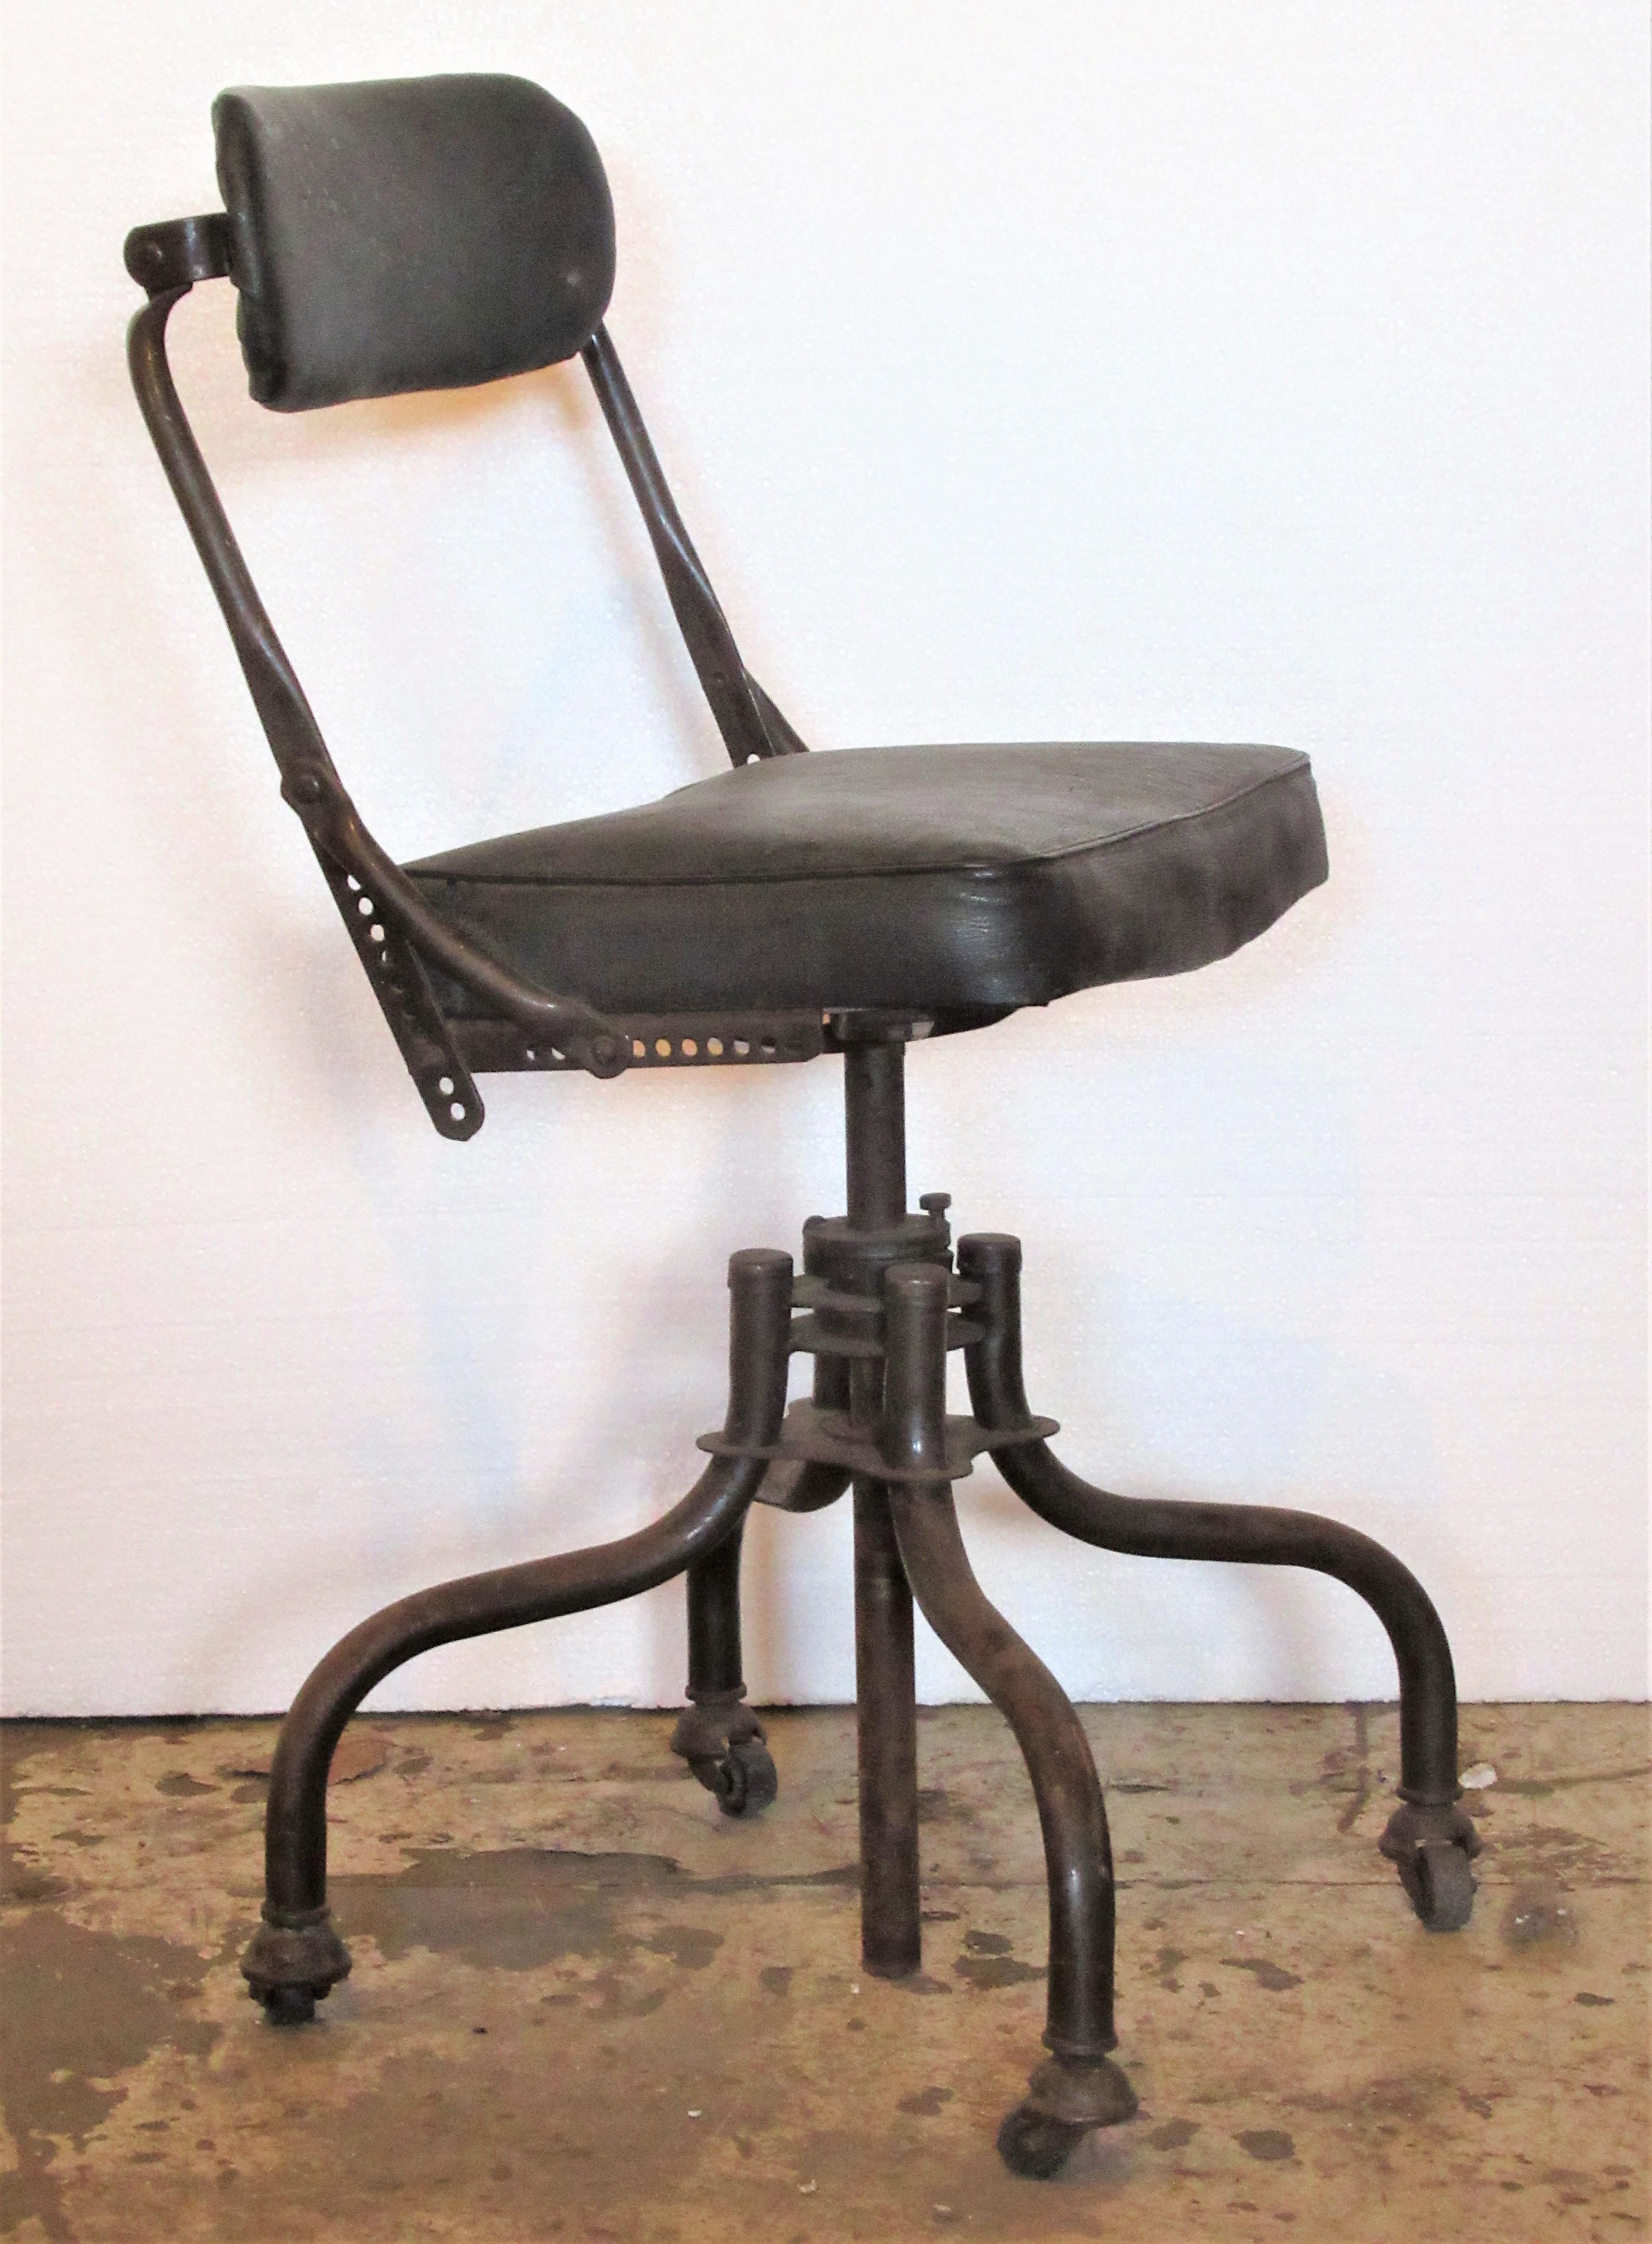 Early Industrial Task Chairs by Domore 1